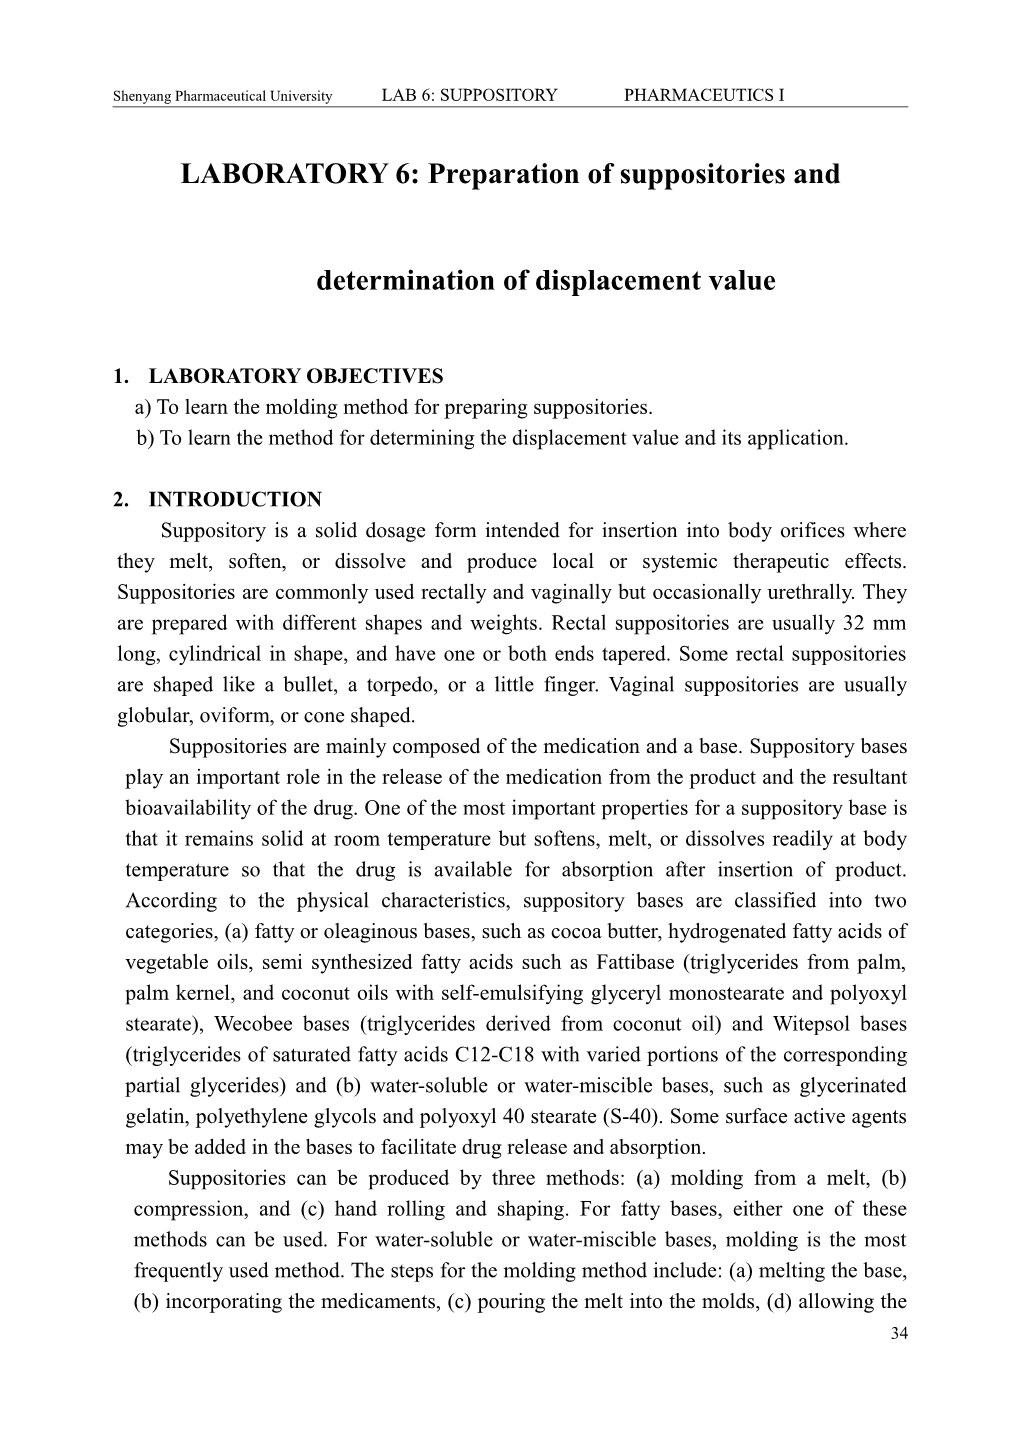 LABORATORY 6: Preparation of Suppositories and Determination of Displacement Value